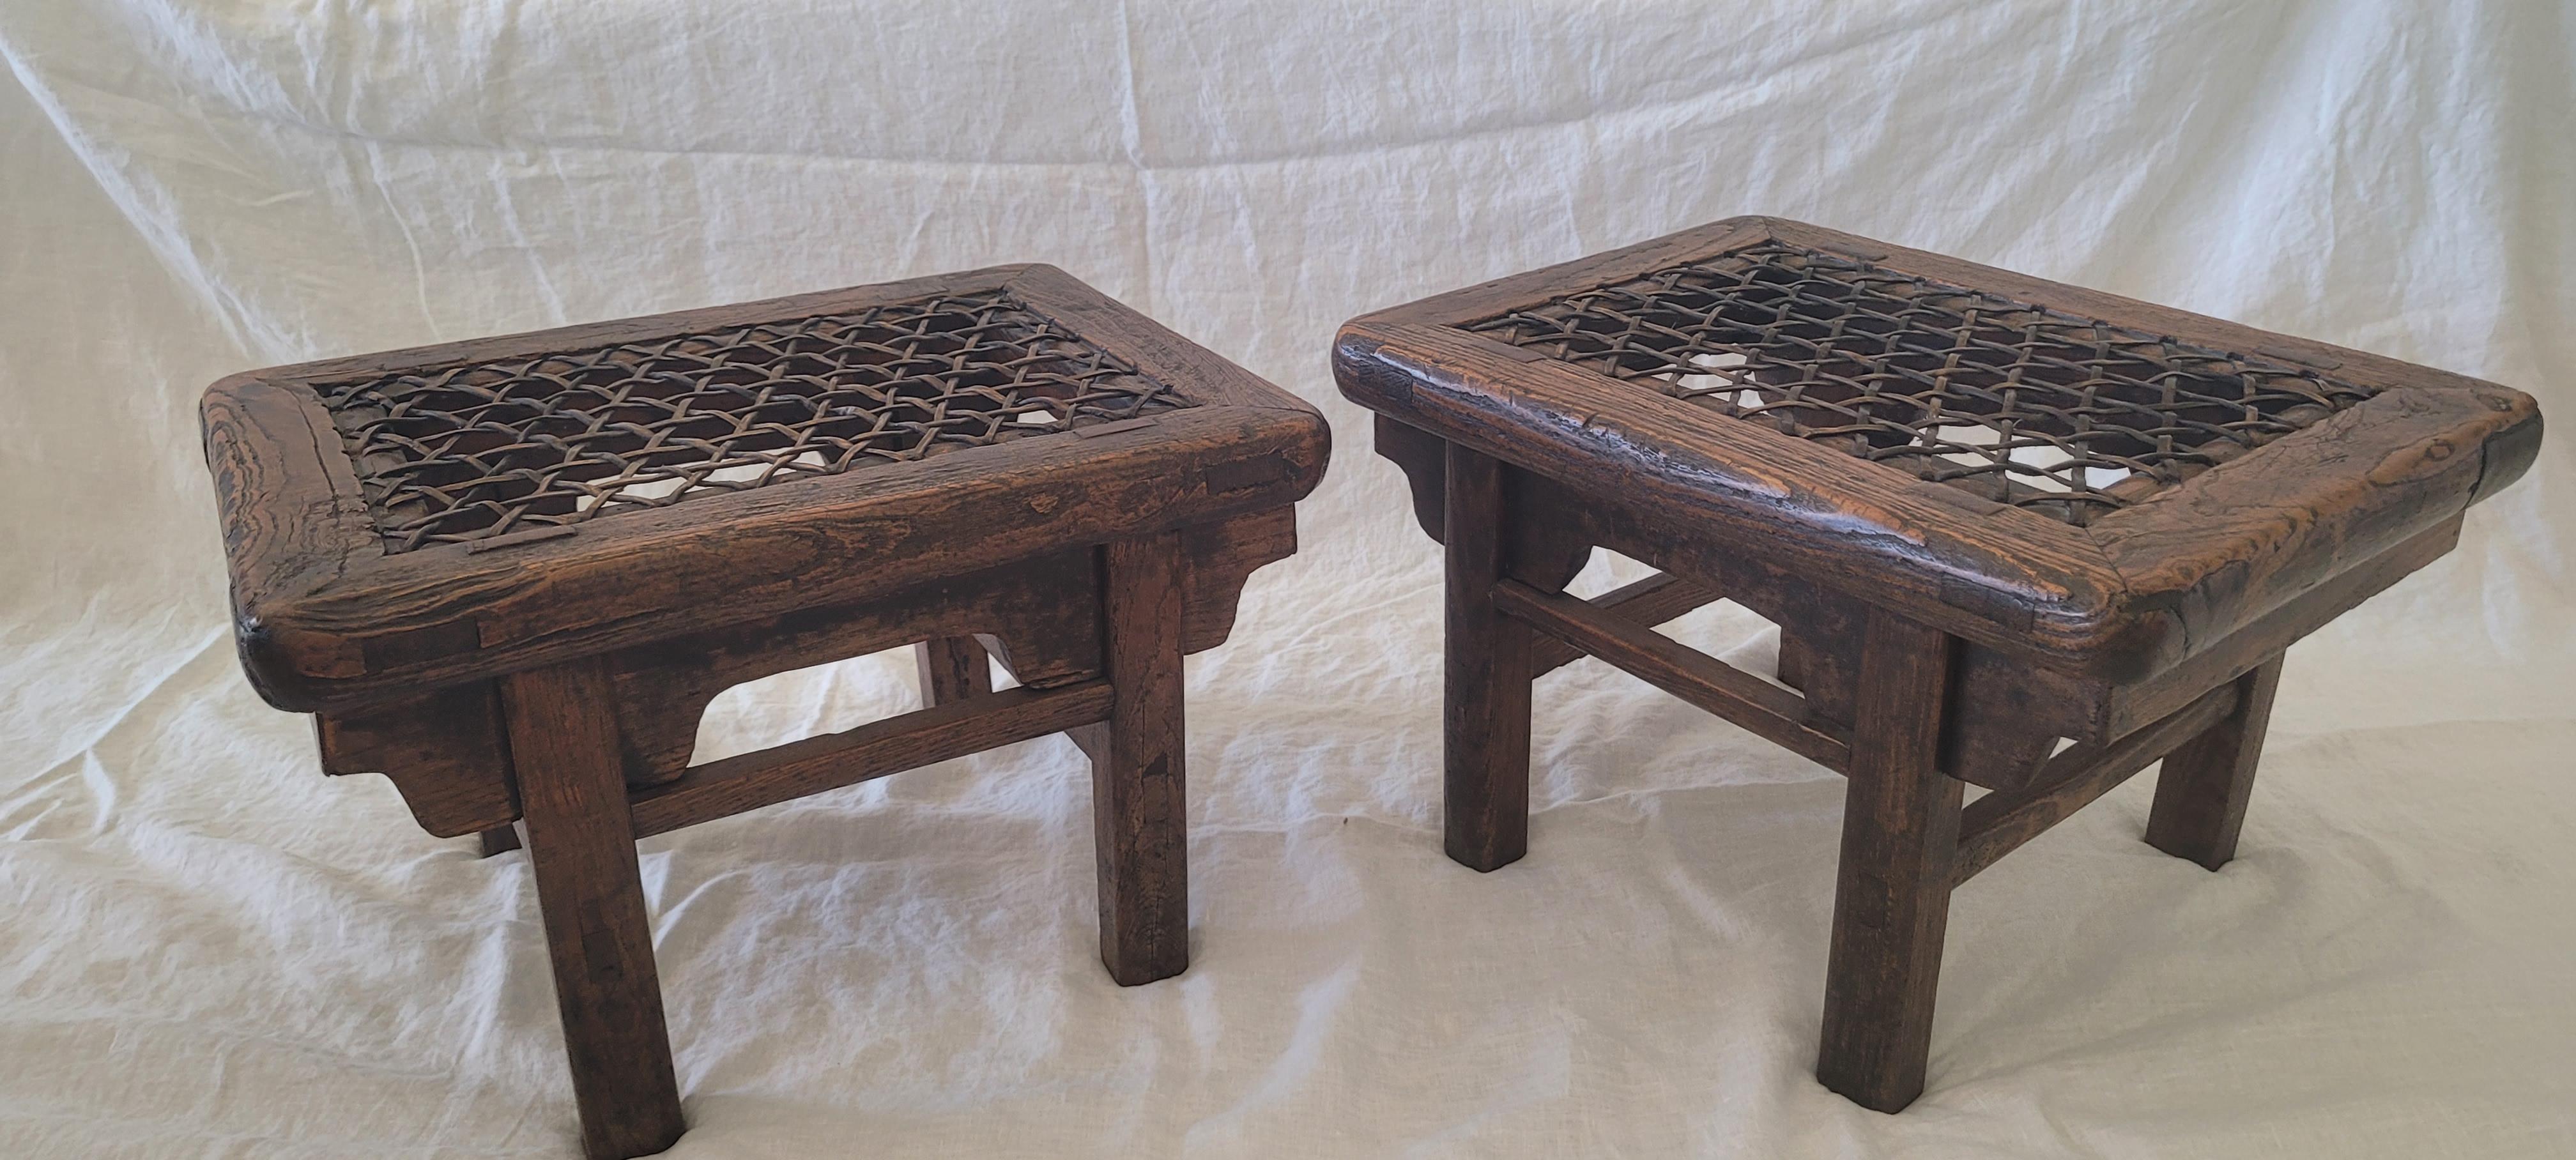 A pair of rectangular shape stools. The seat is made of woven cowhide framed in mitered mortise and tenon members. The legs are recessed and connected to the seat in elongated bridle joints. The aprons and spandrels are simple and undecorated. A